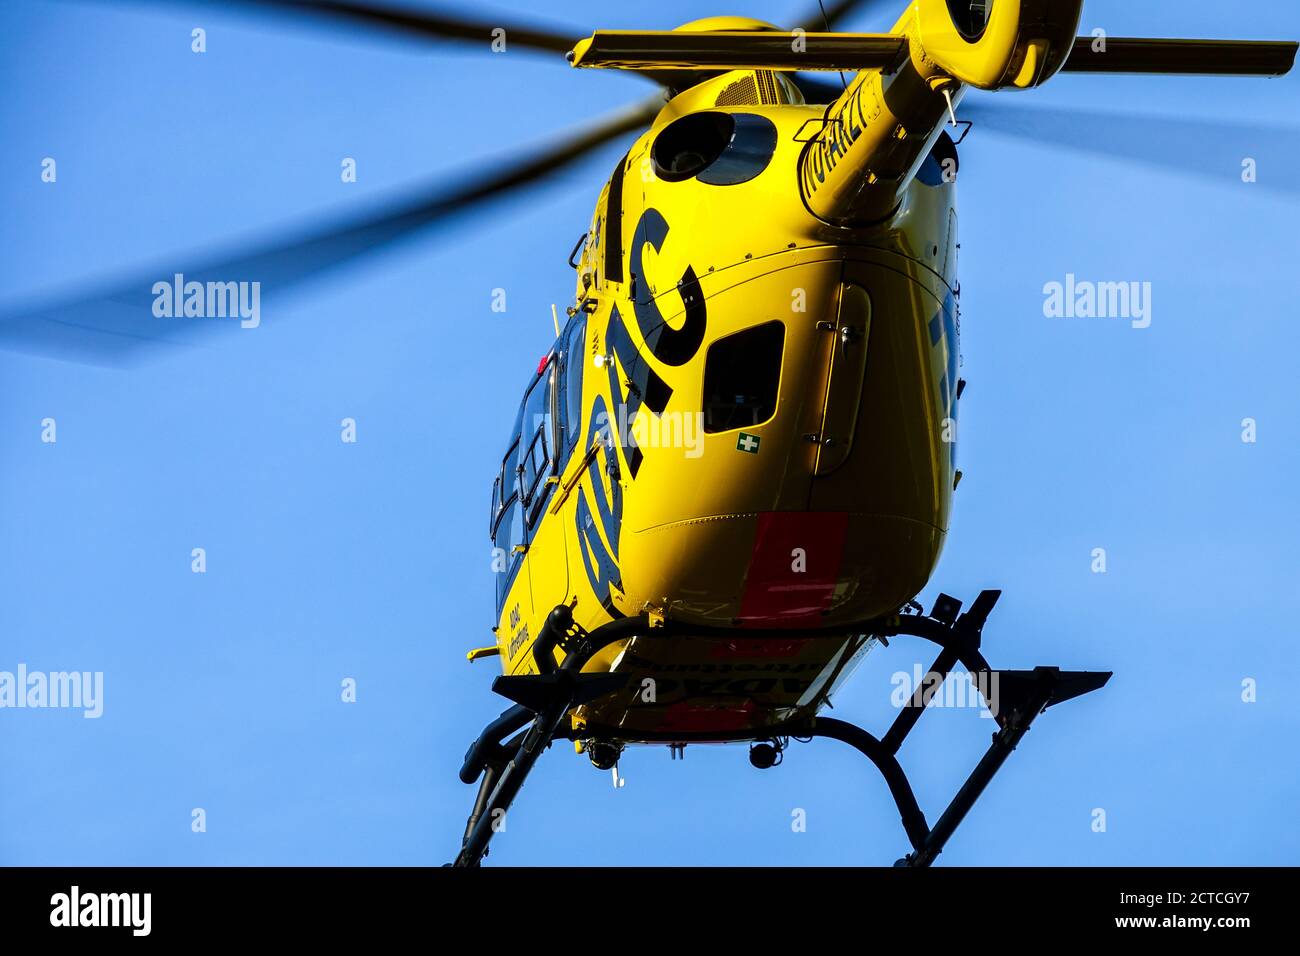 ADAC Germany Air Rescue H135 Helicopter Stock Photo